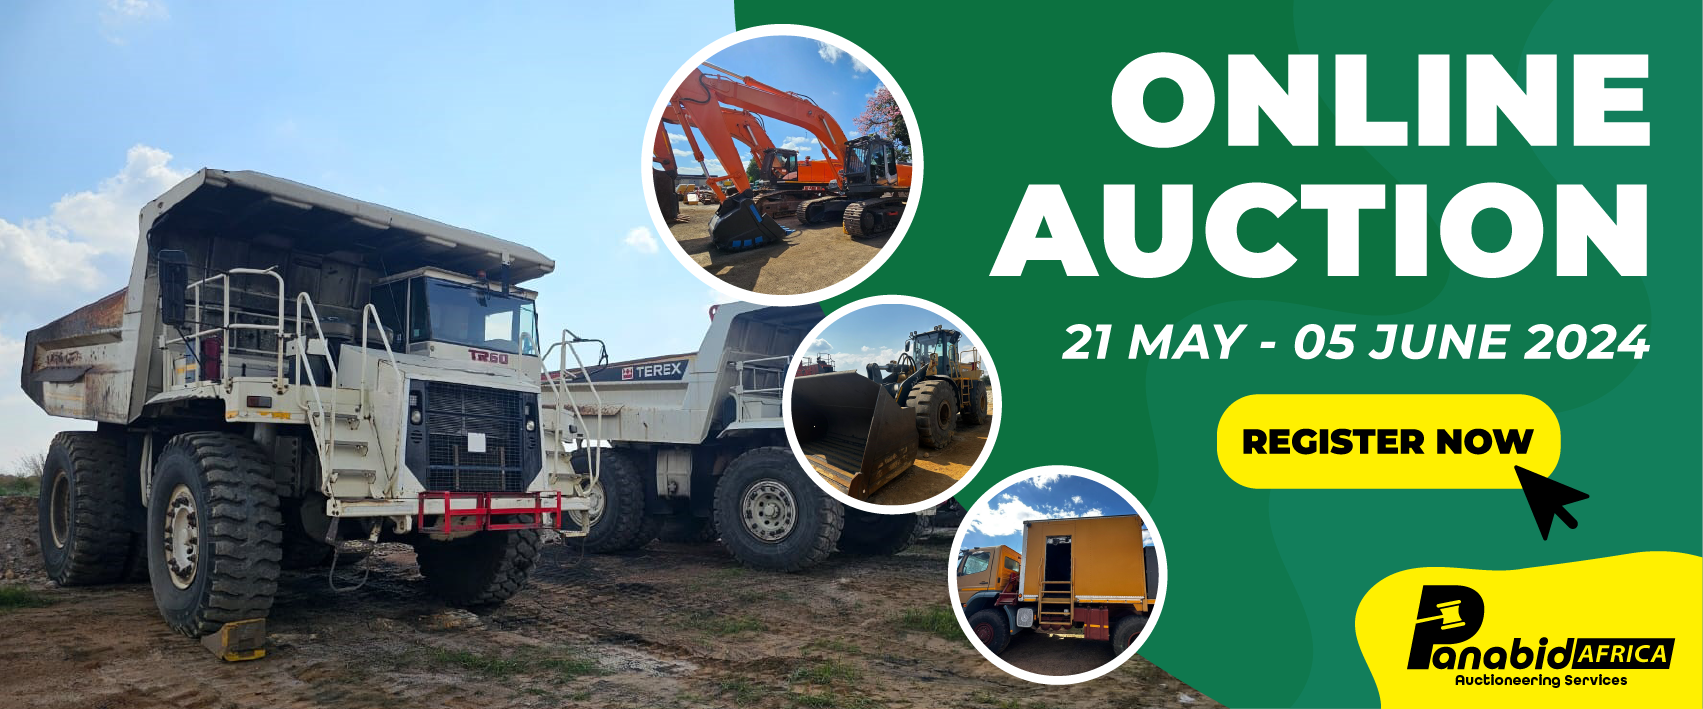 NOT TO BE MISSED TIMED ONLINE AUCTION: DULY AUTHORISED WE WILL SELL ON BEHALF OF OUR CLIENTS MACHINERY, PLANT AND EQUIPMENT THAT WAS IDENTIFIED IN THEIR REPLACEMENT PROGRAM AS REDUNDANT ASSETS – LOTS OF RUNNER AND NON-RUNNER MACHINES